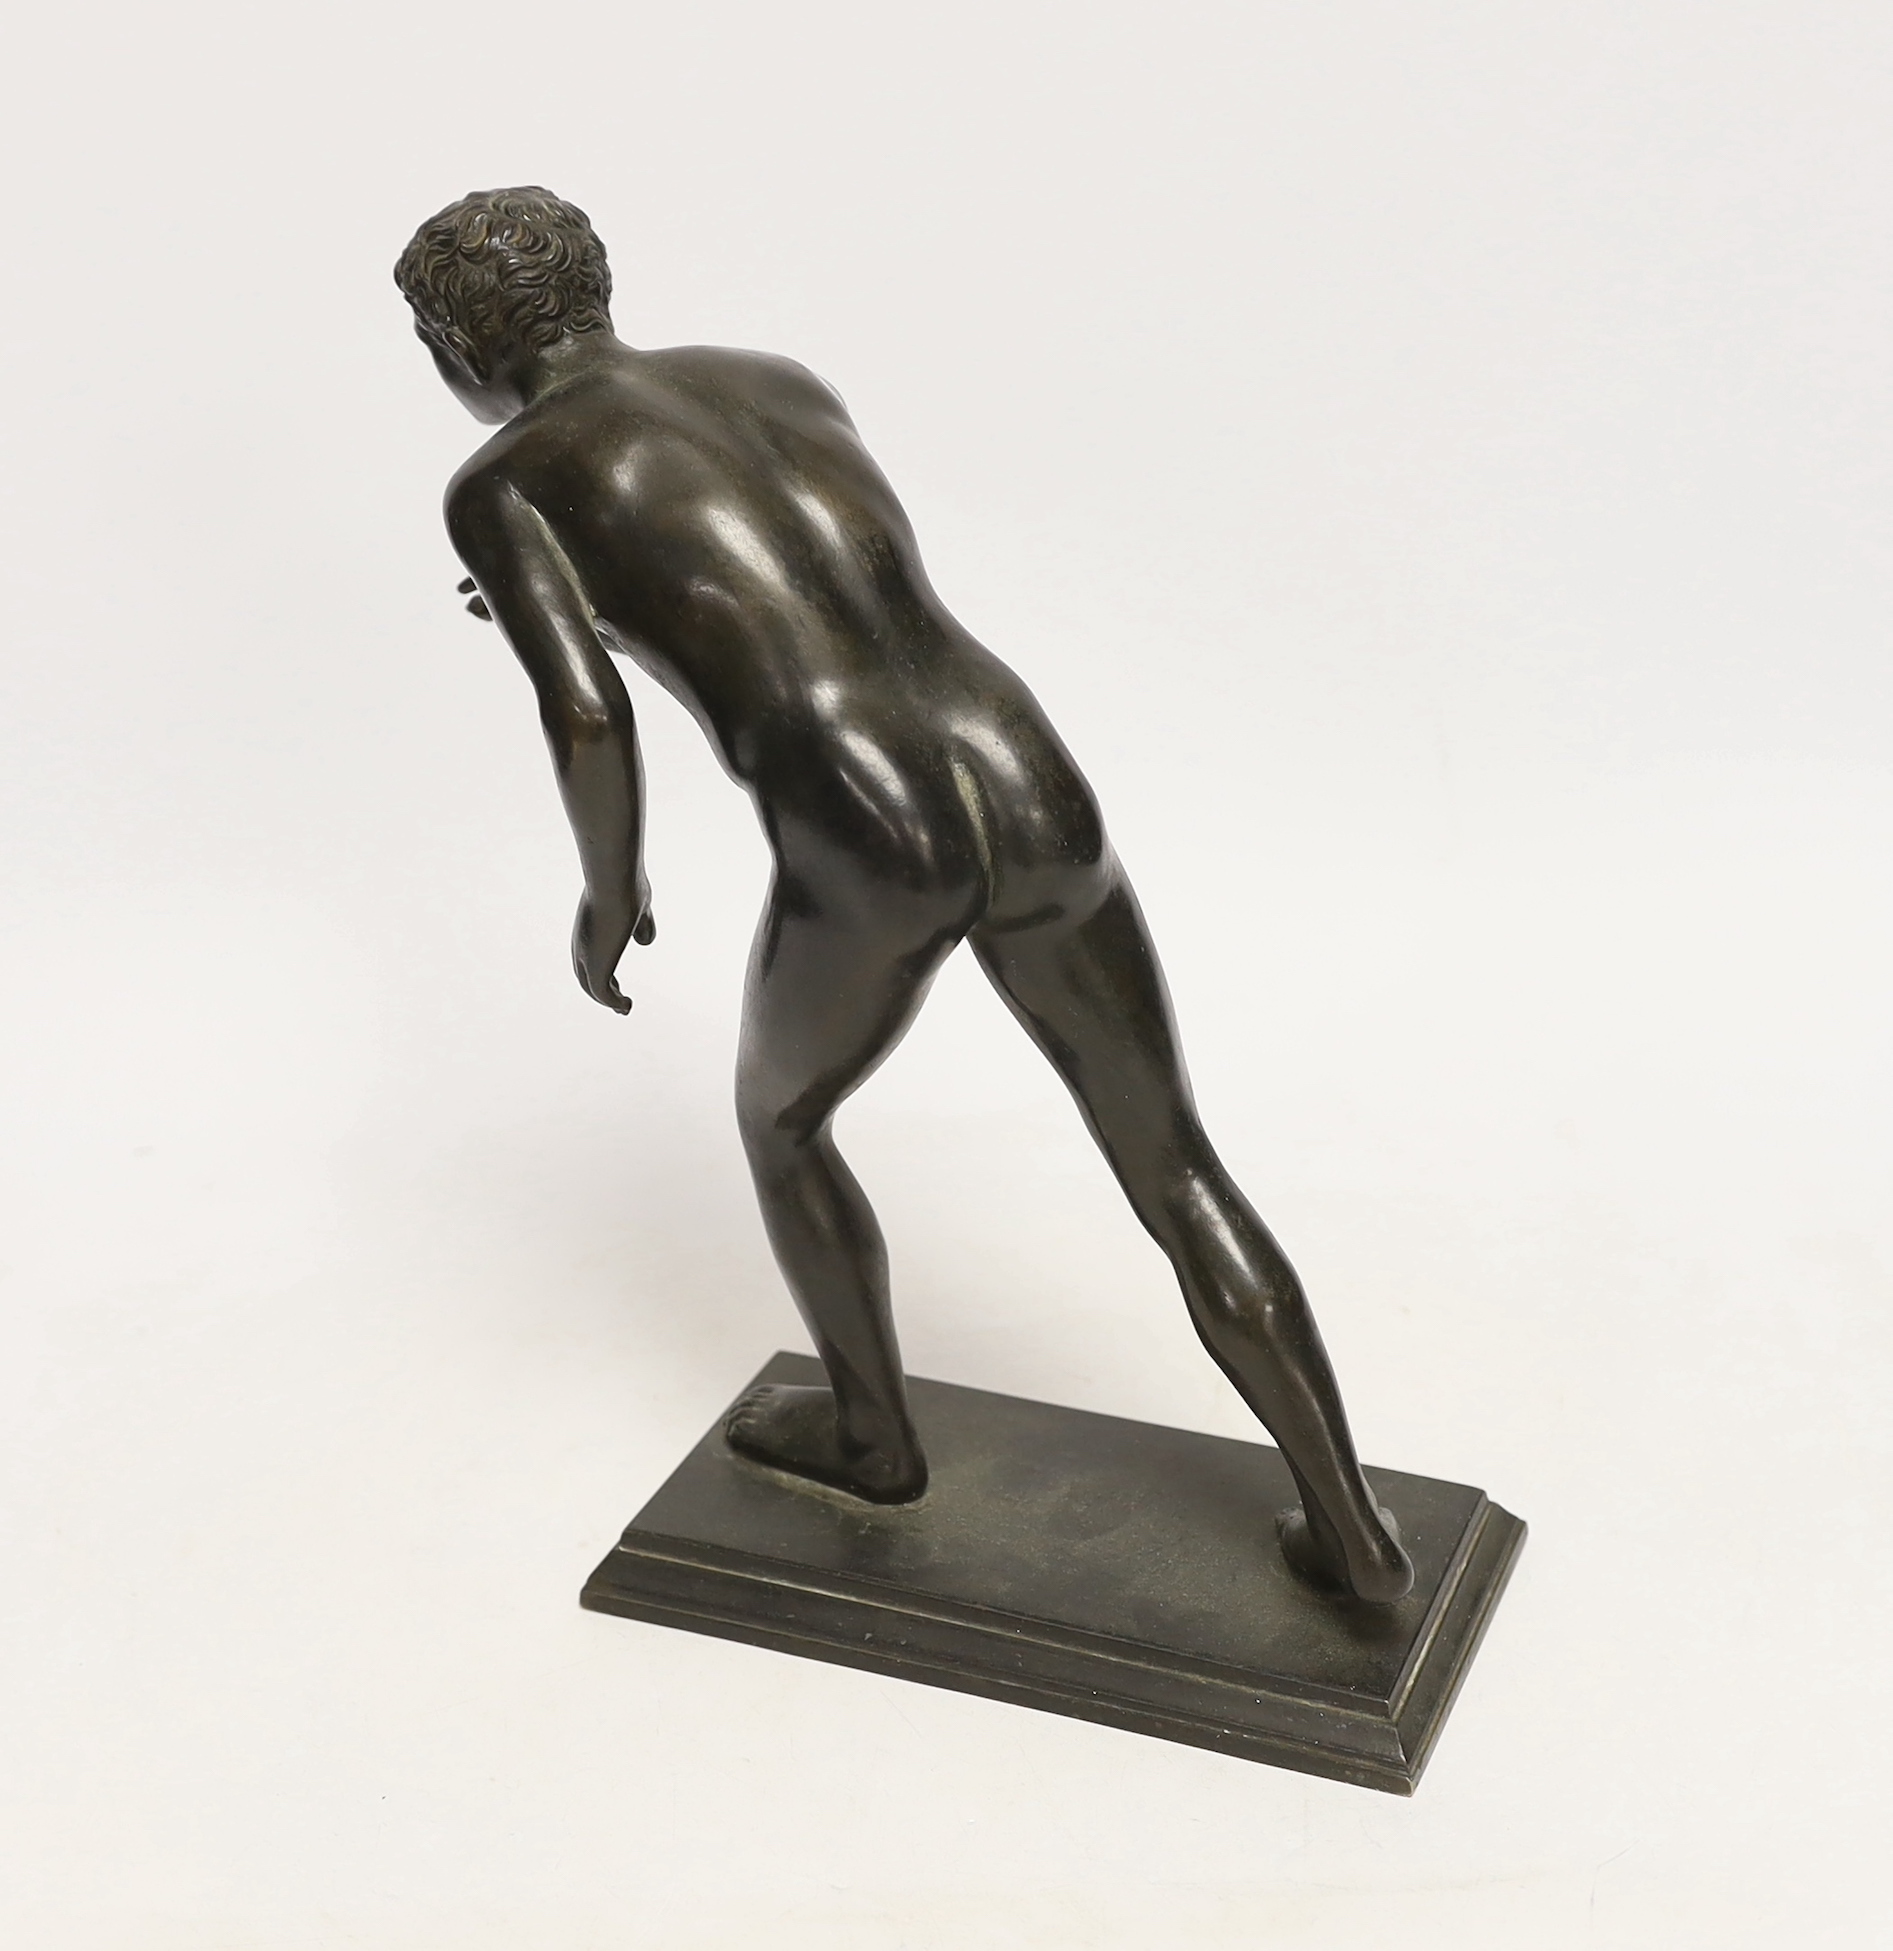 After The Antique, a bronze figure of an athlete, 26cm high